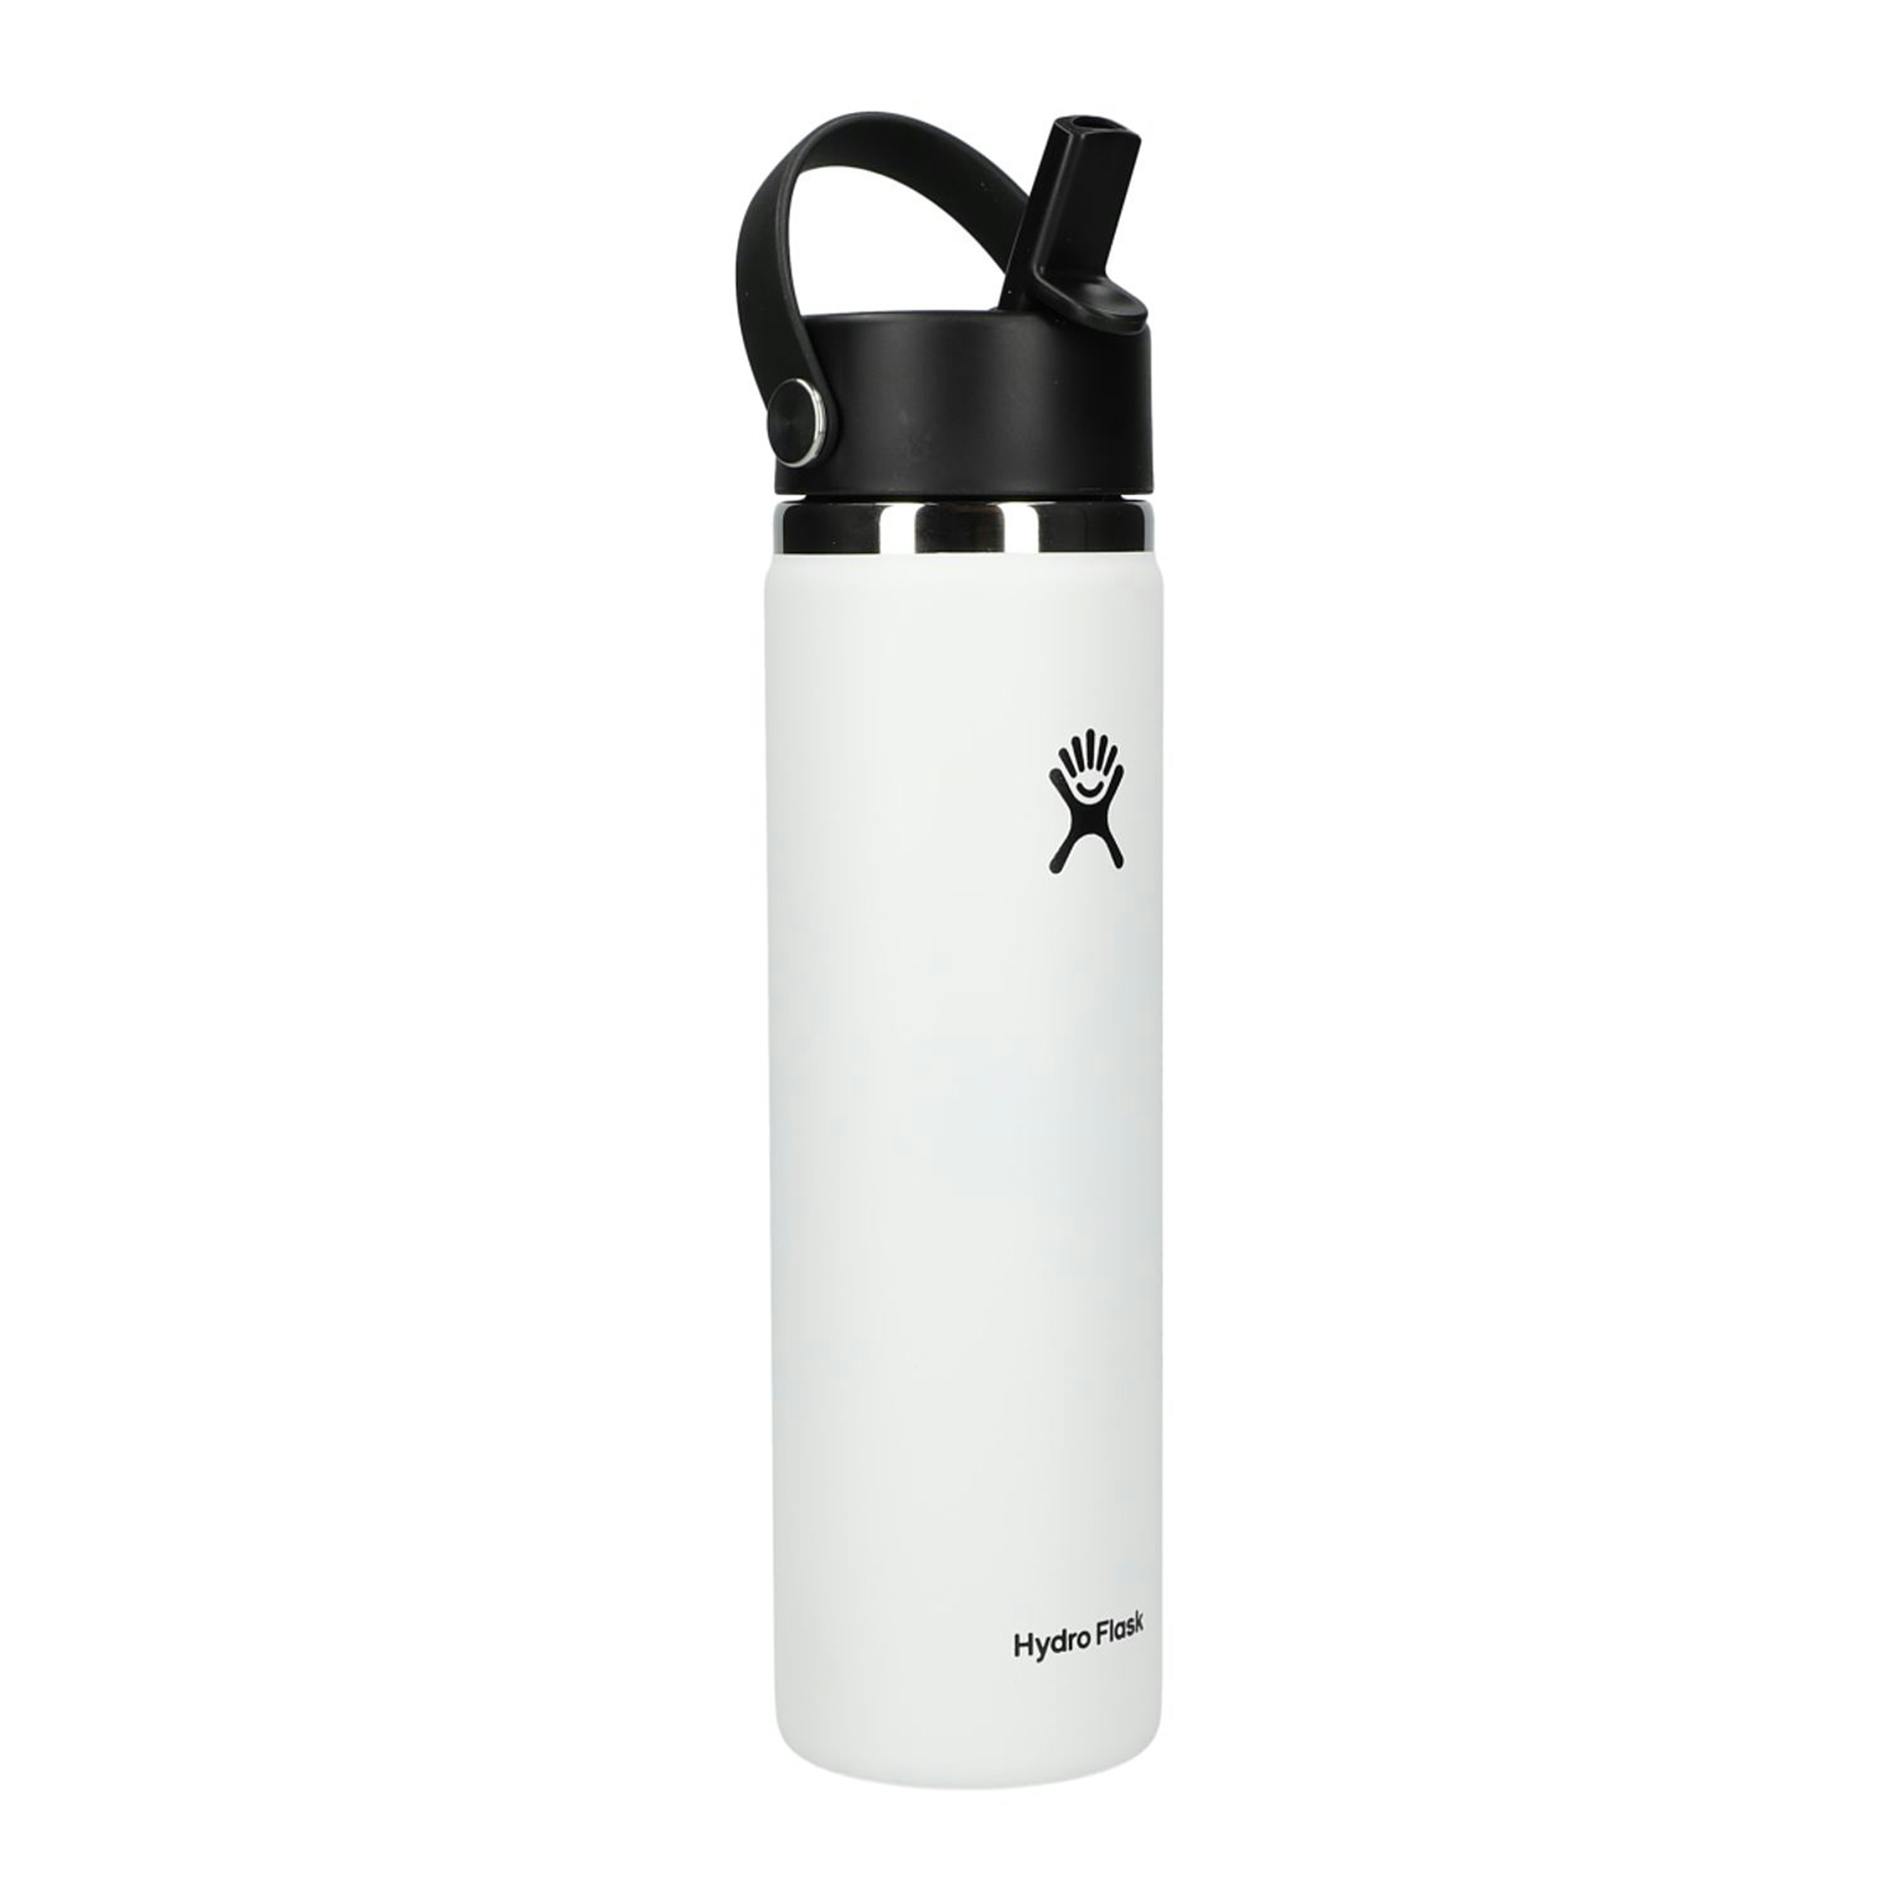 Hydro Flask Wide Mouth 24oz Bottle with Flex Straw Cap - additional Image 3